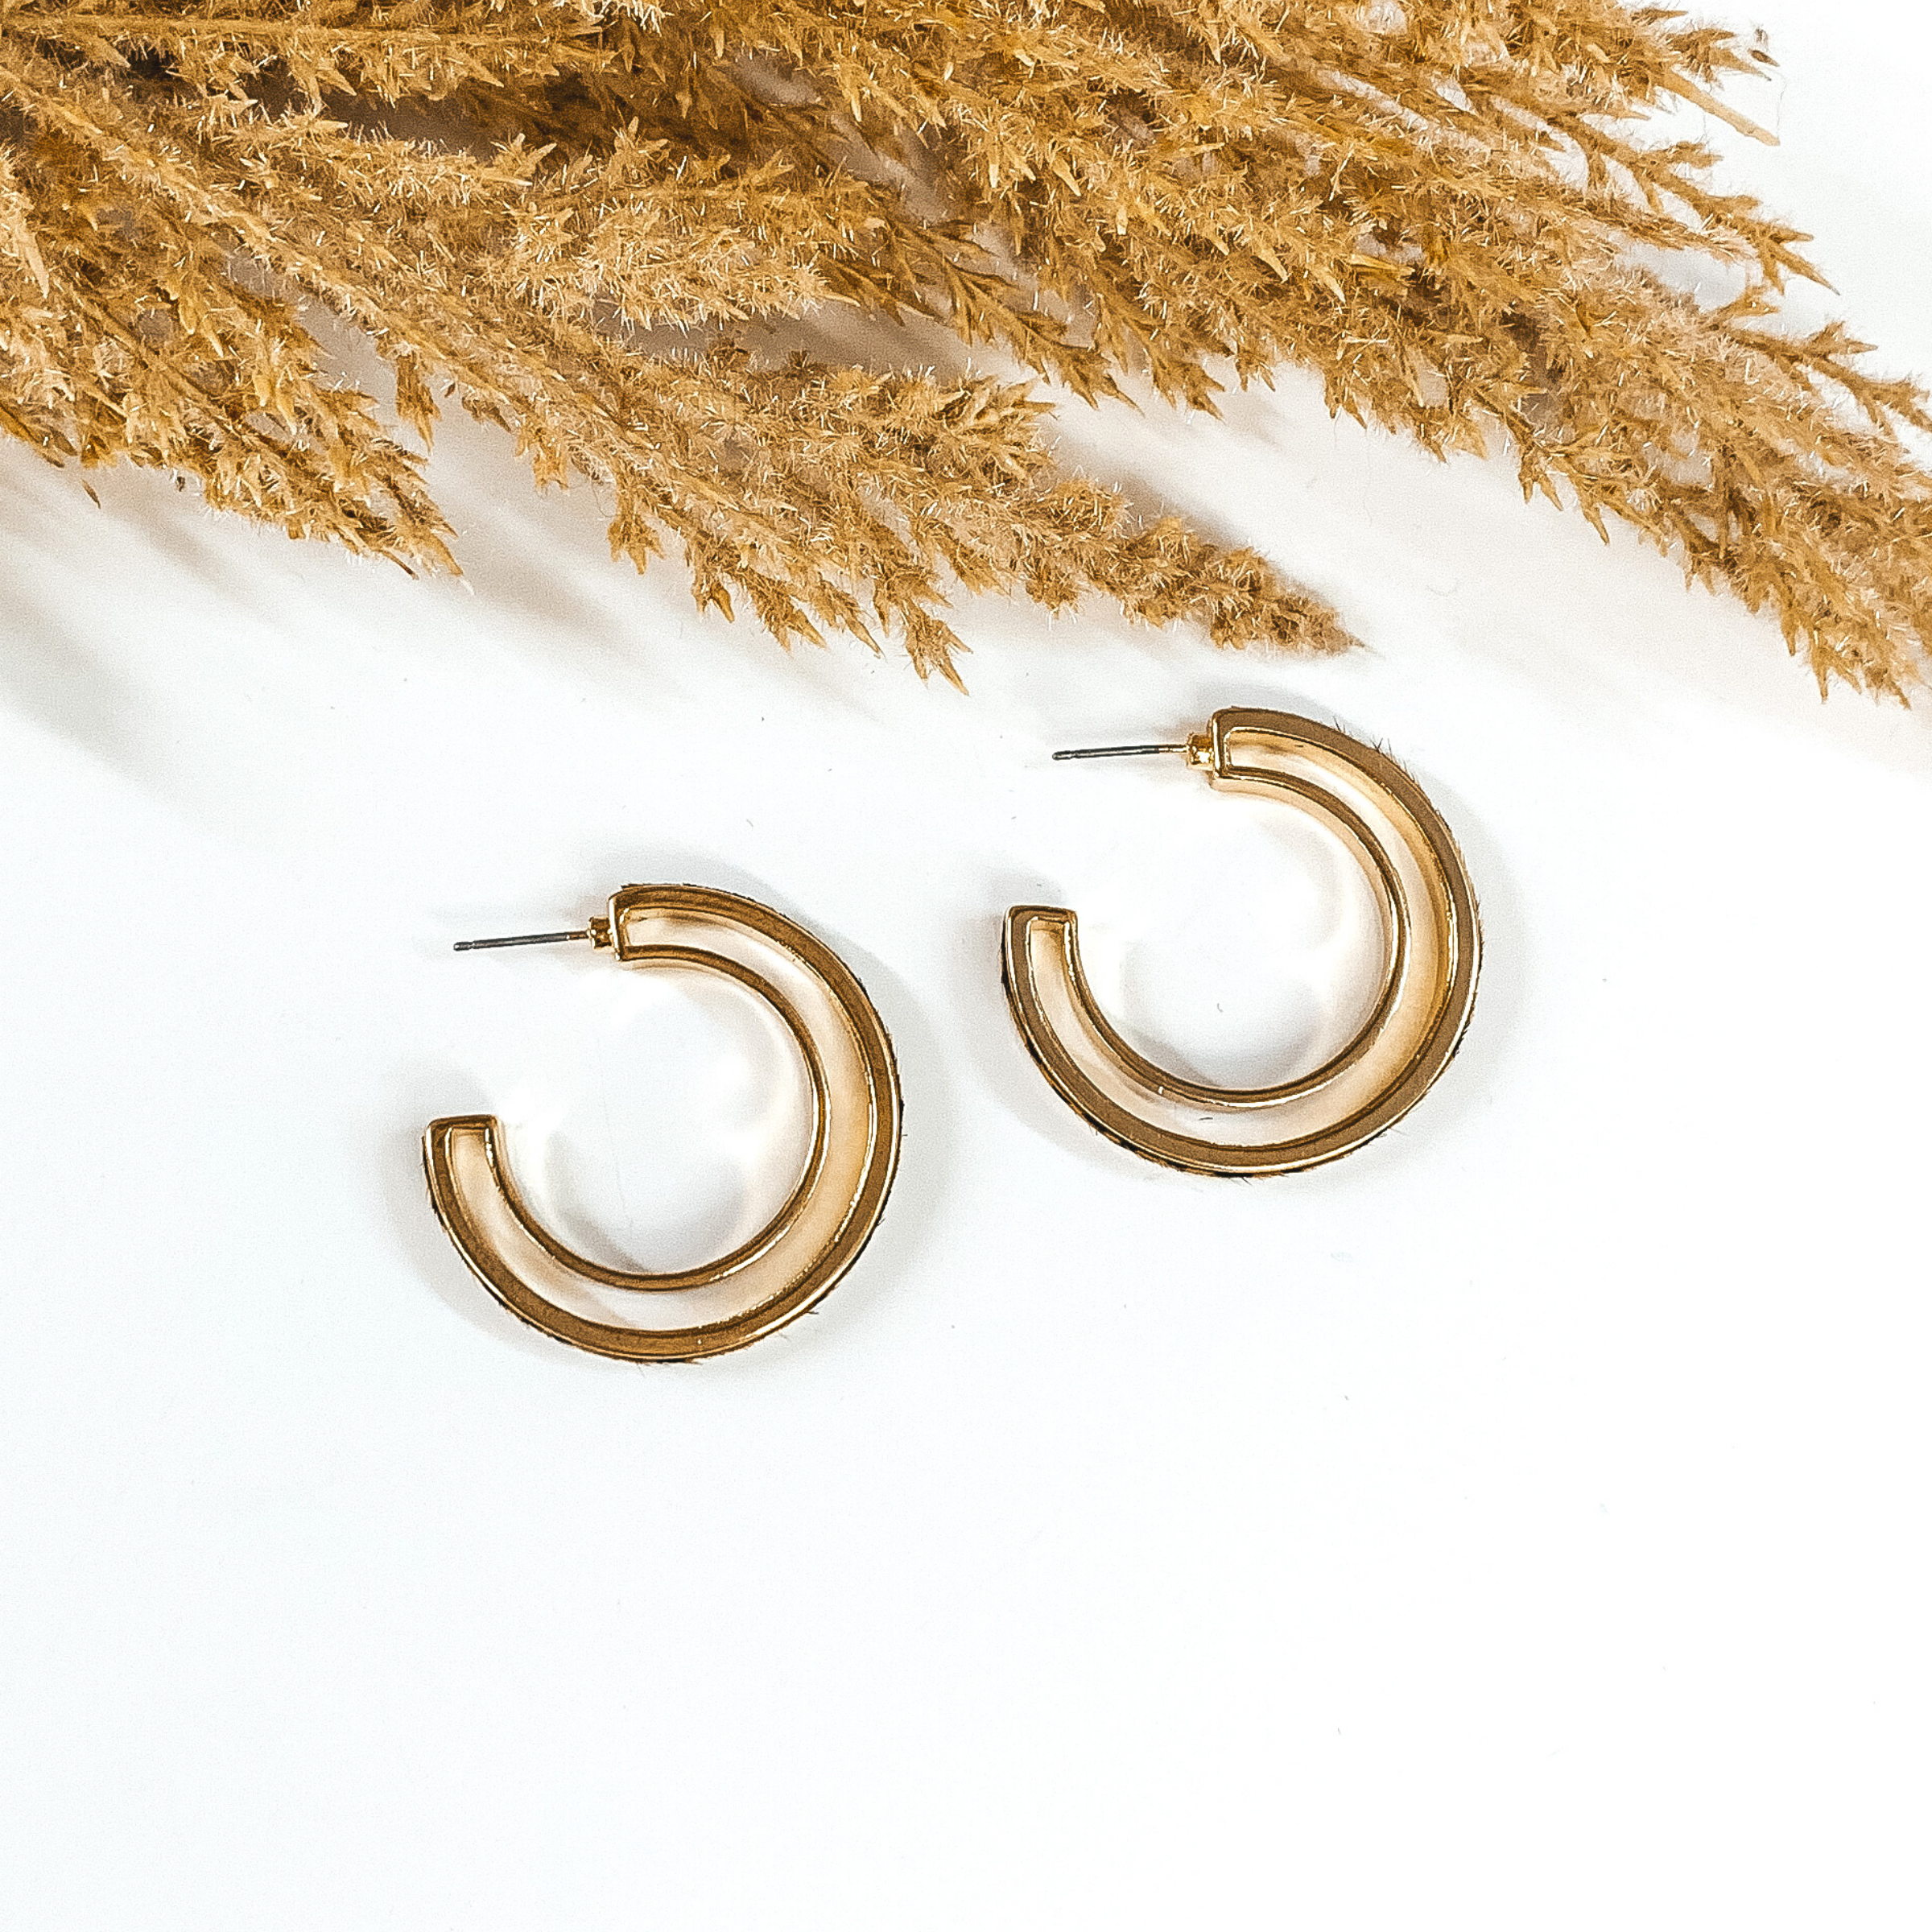 Gold Double Circle Hoop Earrings with White Animal Print Inlay - Giddy Up Glamour Boutique